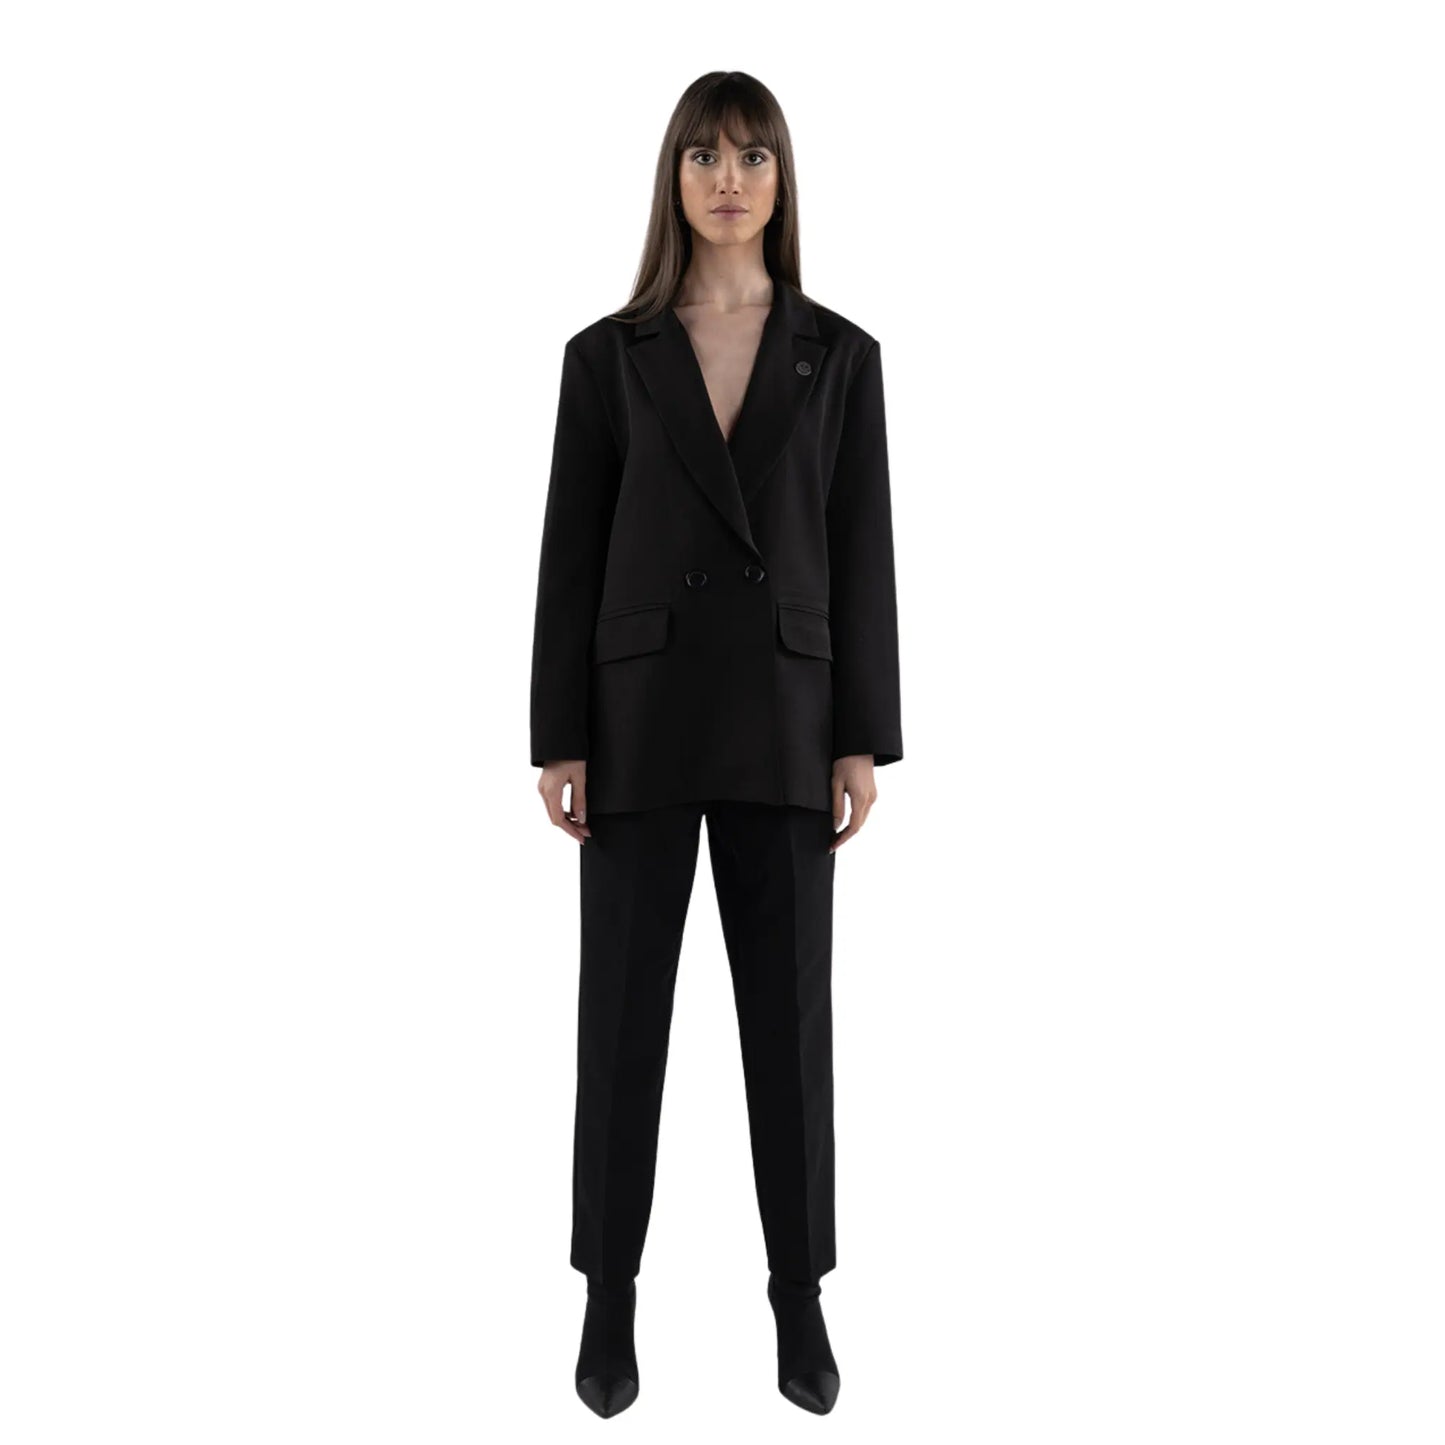 Double-Breasted Blazer & High-Waist Trousers Set on brunette model front view